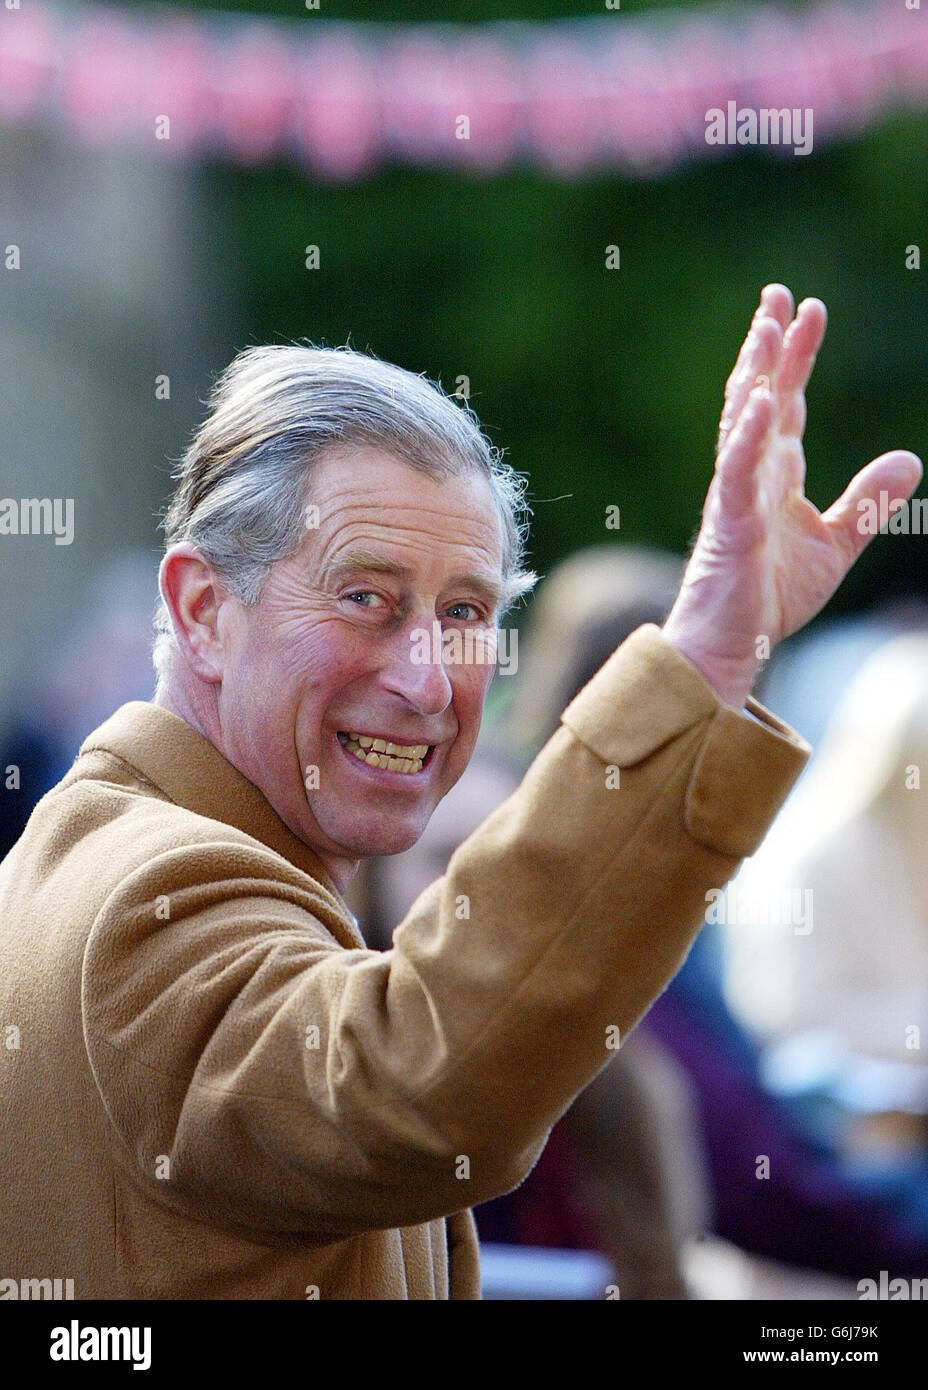 The Prince of Wales waves to the crowds gathered at Pendle Heritage Centre in the village of Barrowford, Lancashire, where he met Sir Roger Bannister - who almost 50 years ago became the first athlete to run a sub-four minute mile - at Park Hill House, where a cross-section of the building is on show allowing visitors to see how the buildings were constructed. Stock Photo